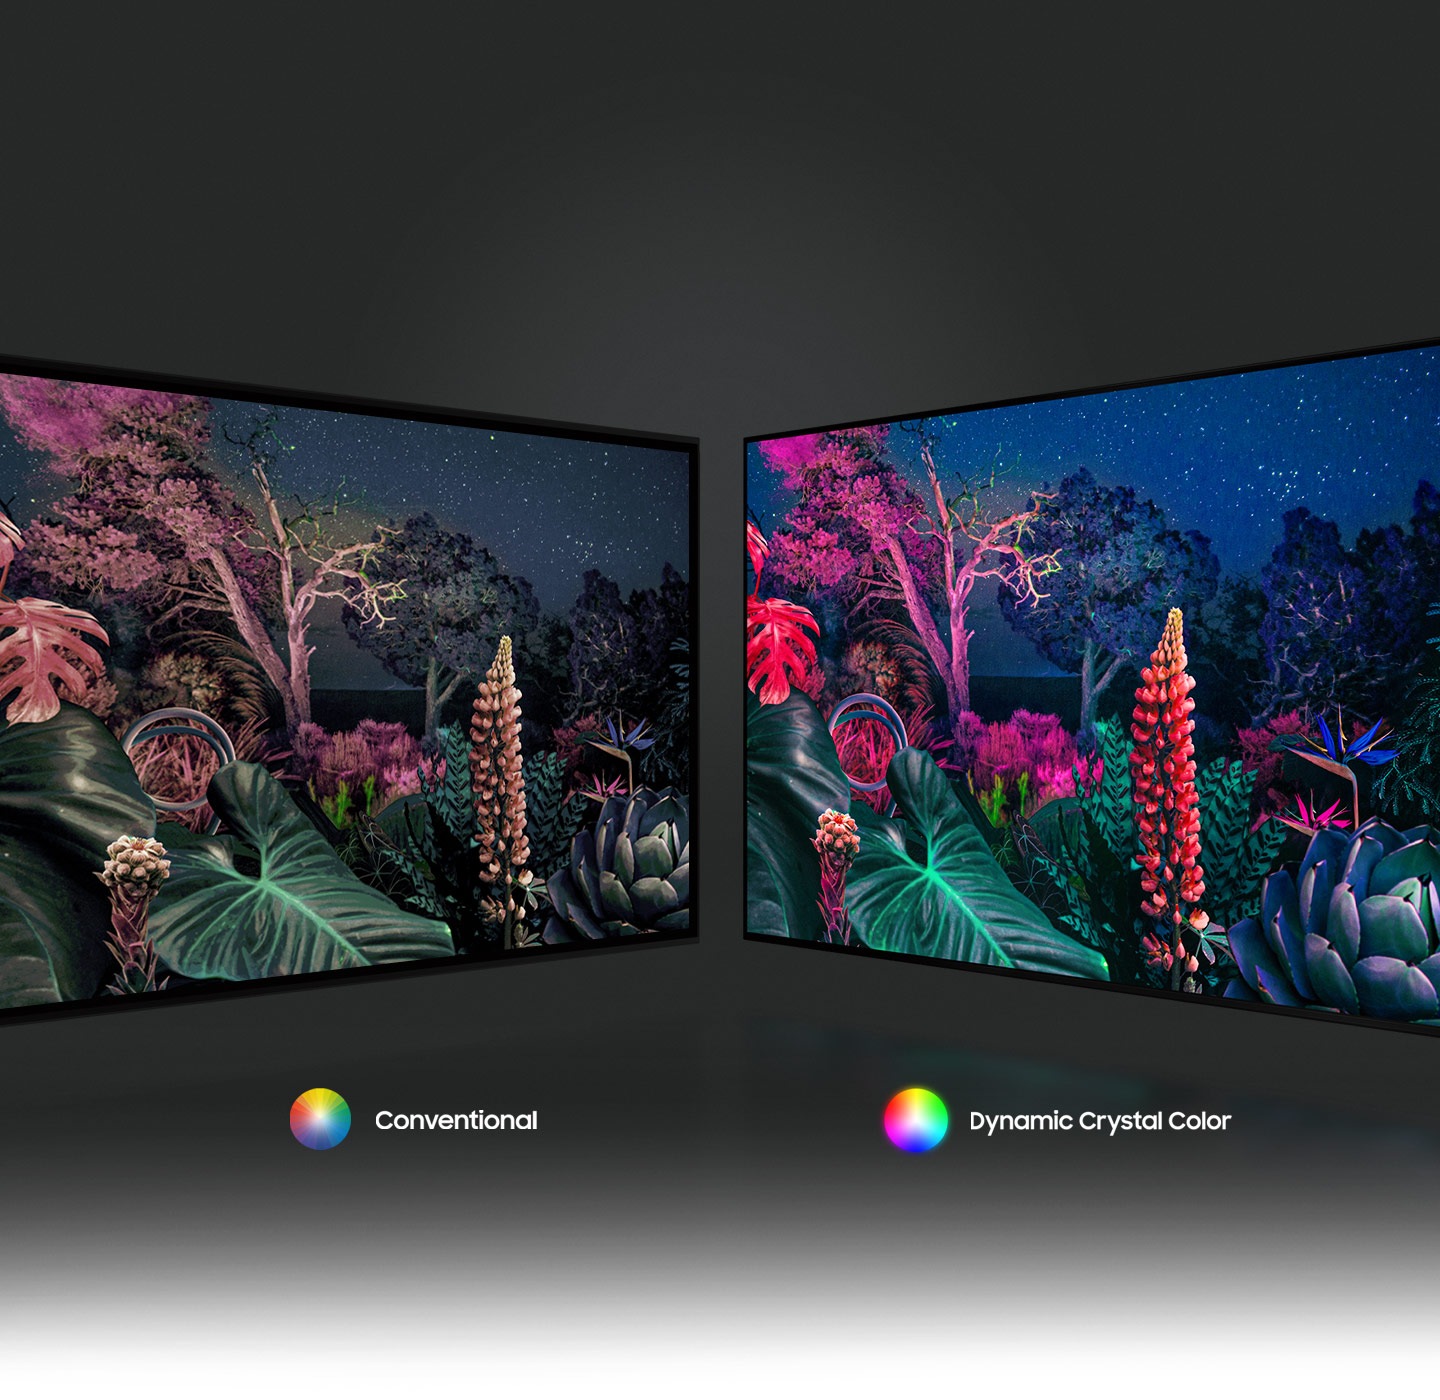 The forest image on the right demonstrates a more intricately colored image due to Dynamic Crystal Color technology compare to the conventional on the left. SAMSUNG 85" Crystal 4K Smart UHD TV UA85AU8000RSFS